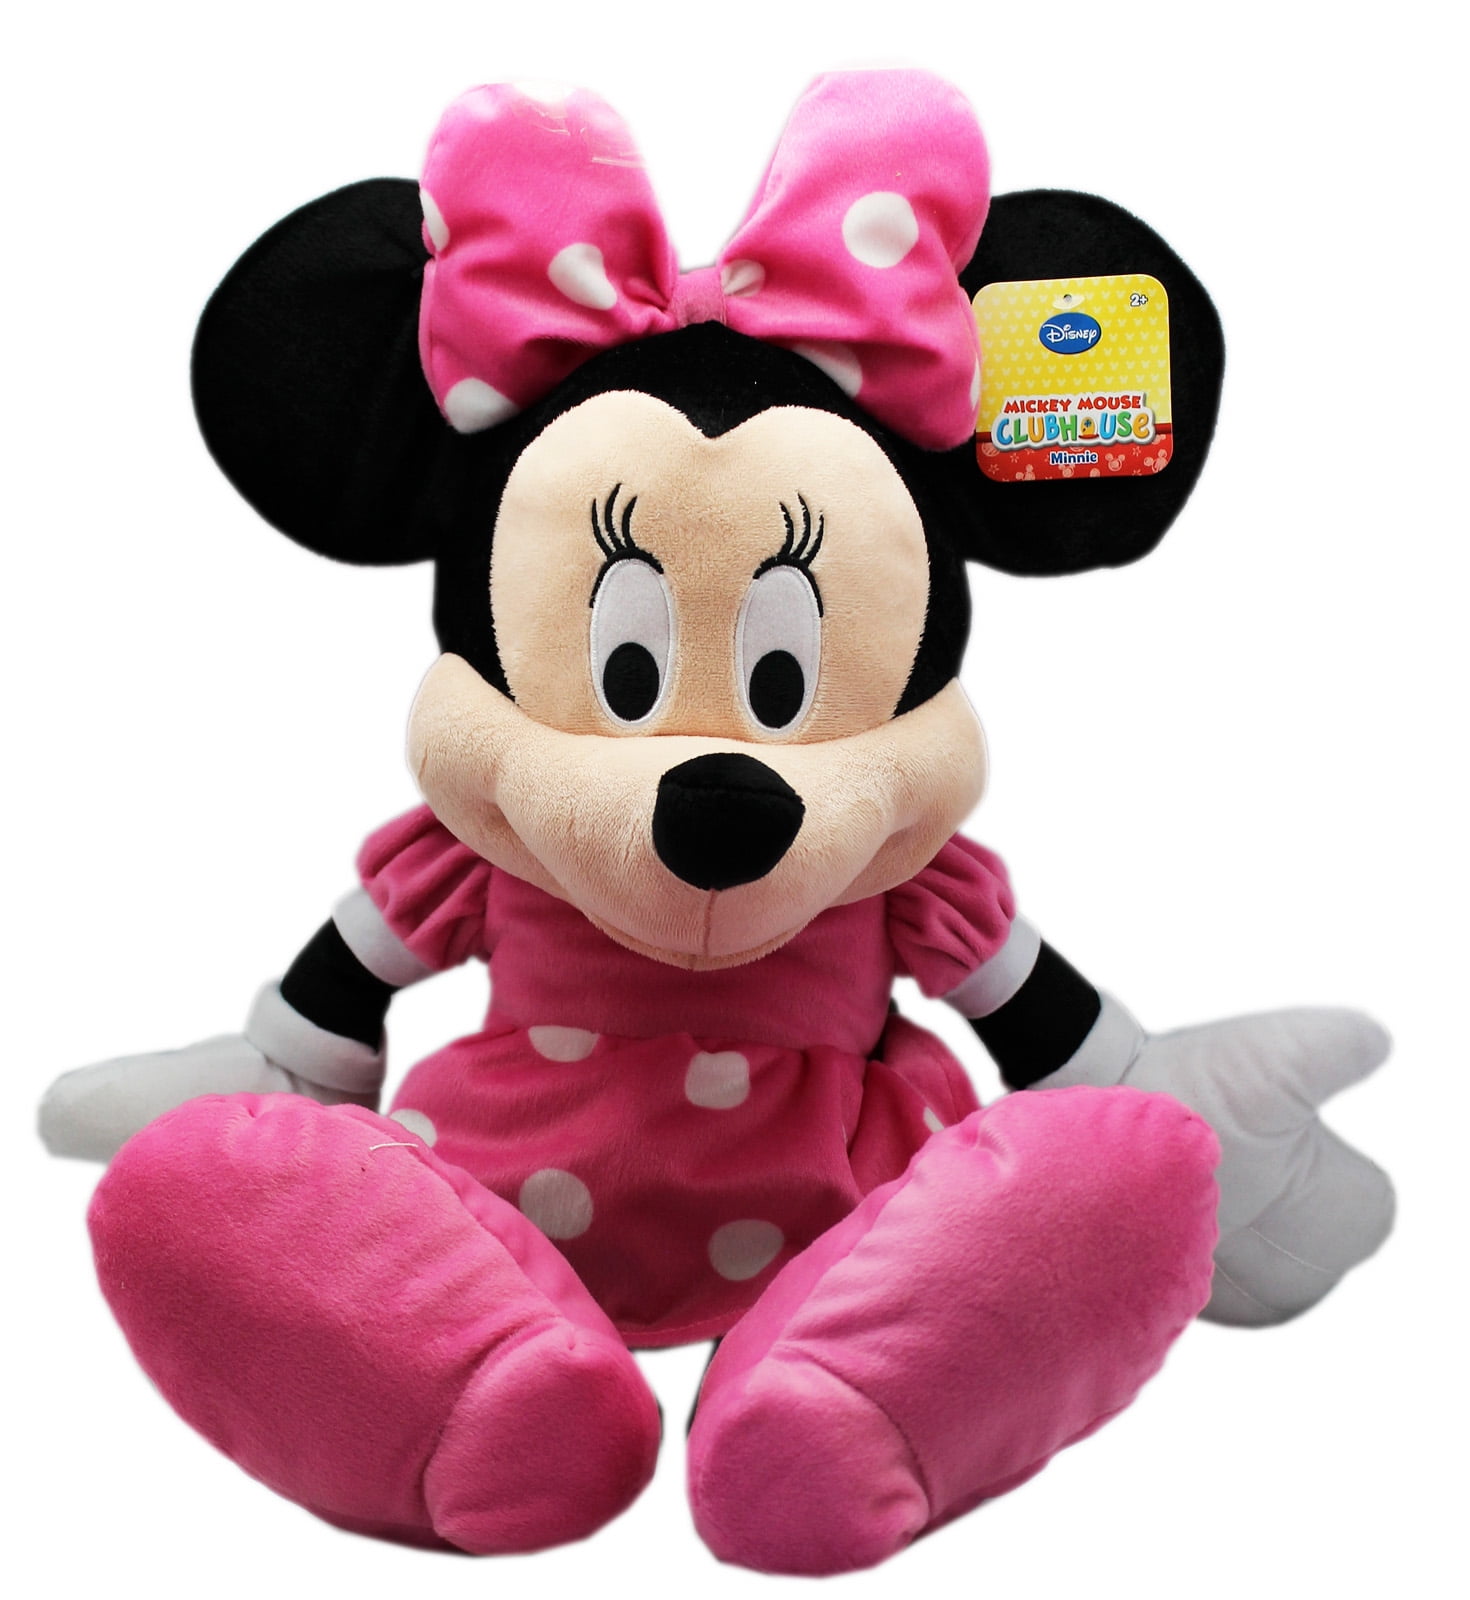 TY DISNEY MINNIE MOUSE MICKEY RED SPARKLE DRESS PLUSH STUFFED TOY Large 16” New 